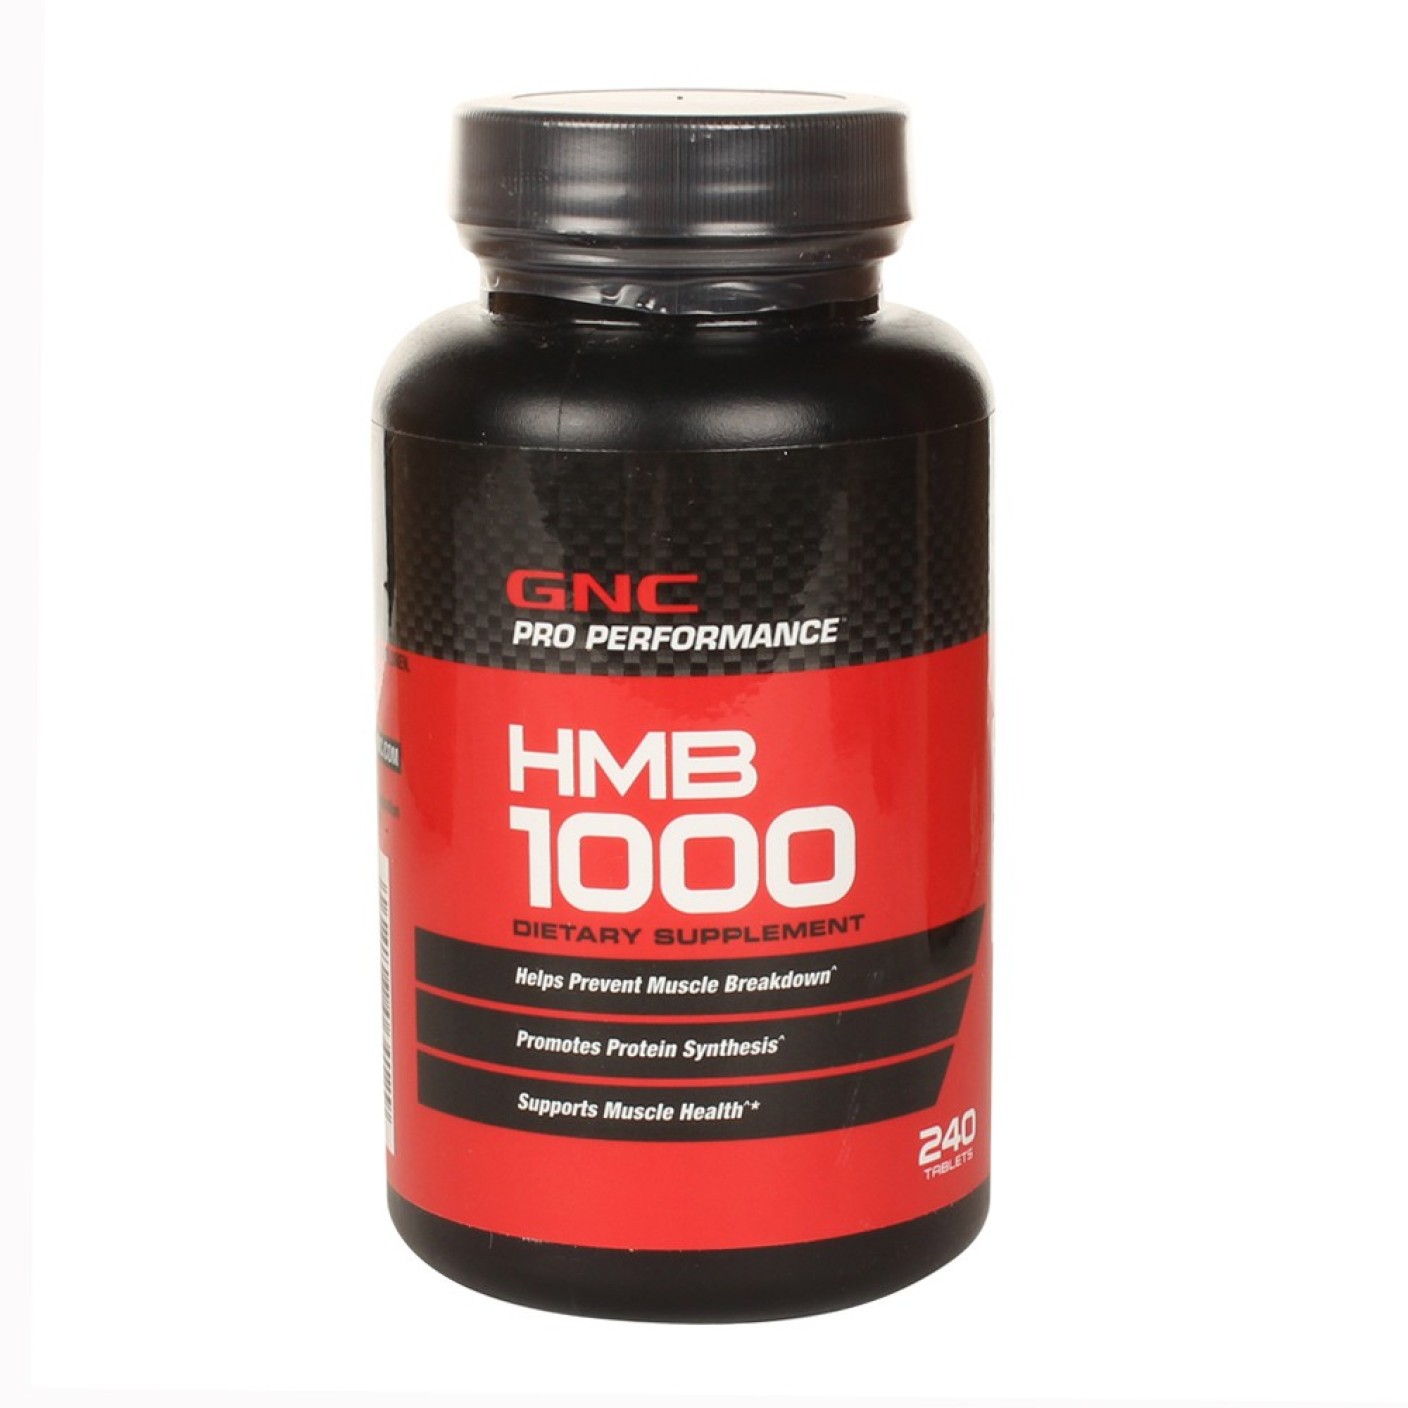 GNC Pro Performance HMB 1000 Tablets Supports Muscle Health Price